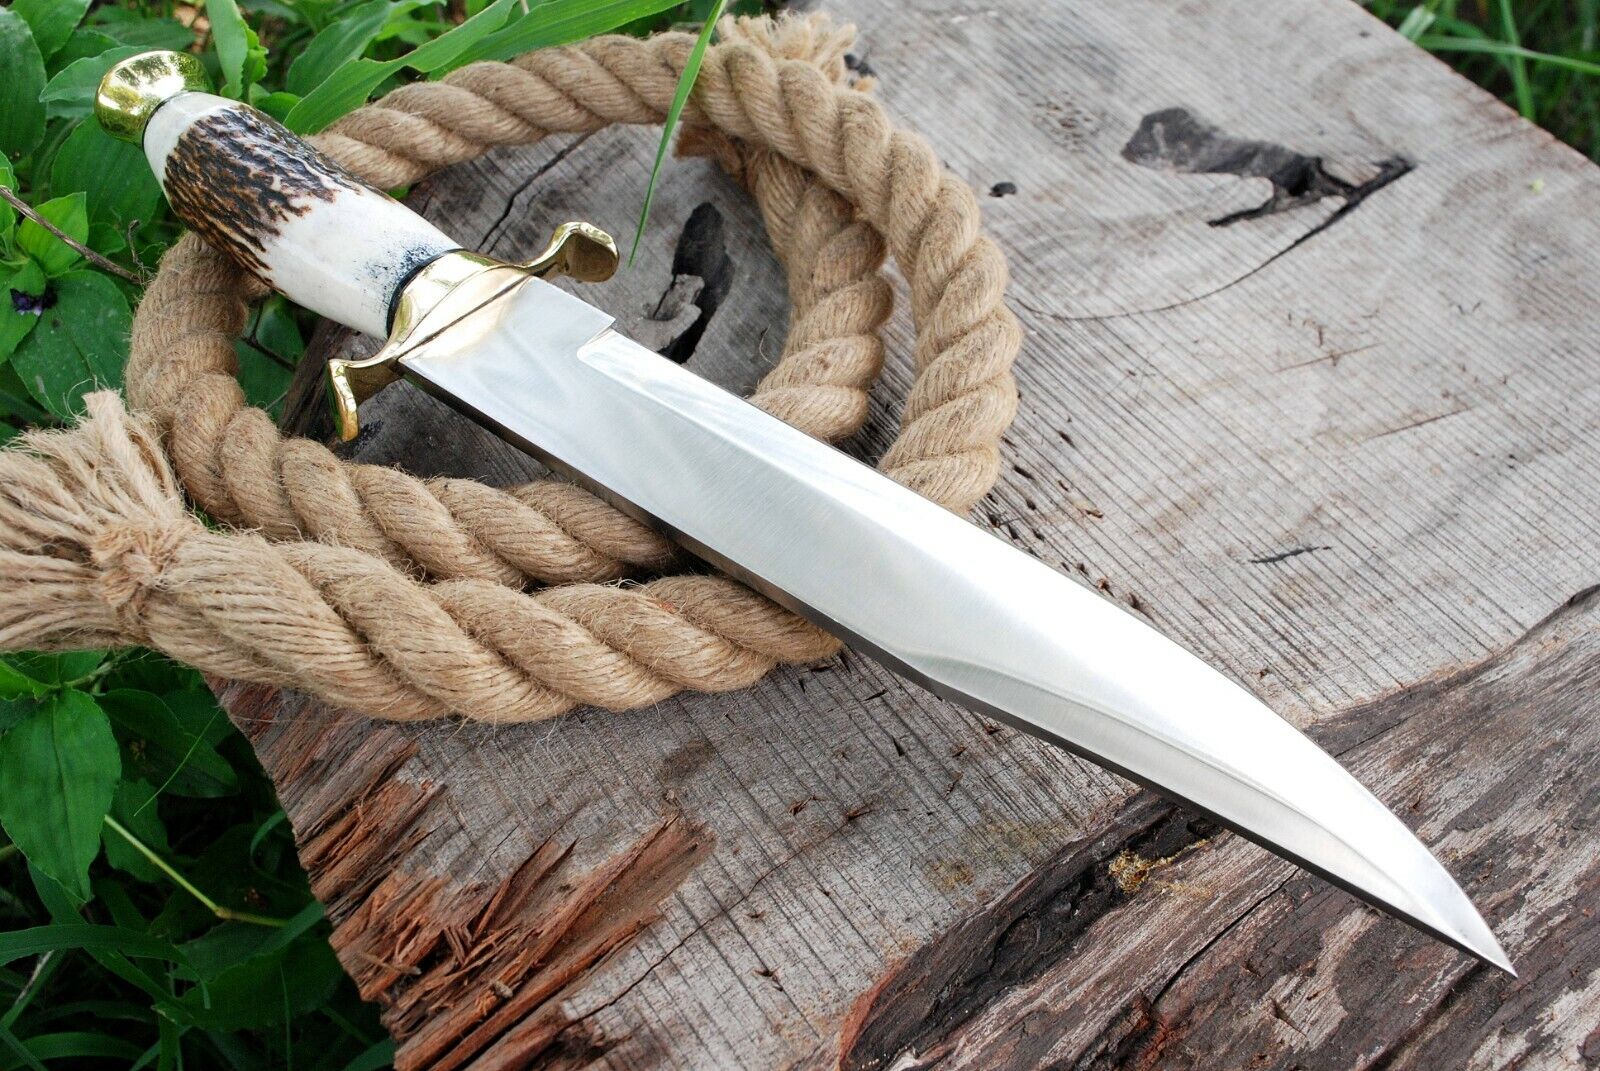 RARE STAG OUTDOOR HANDMADE HUNTING SURVIVAL TACTICAL BOWIE KNIFE ANTLER GRIP 